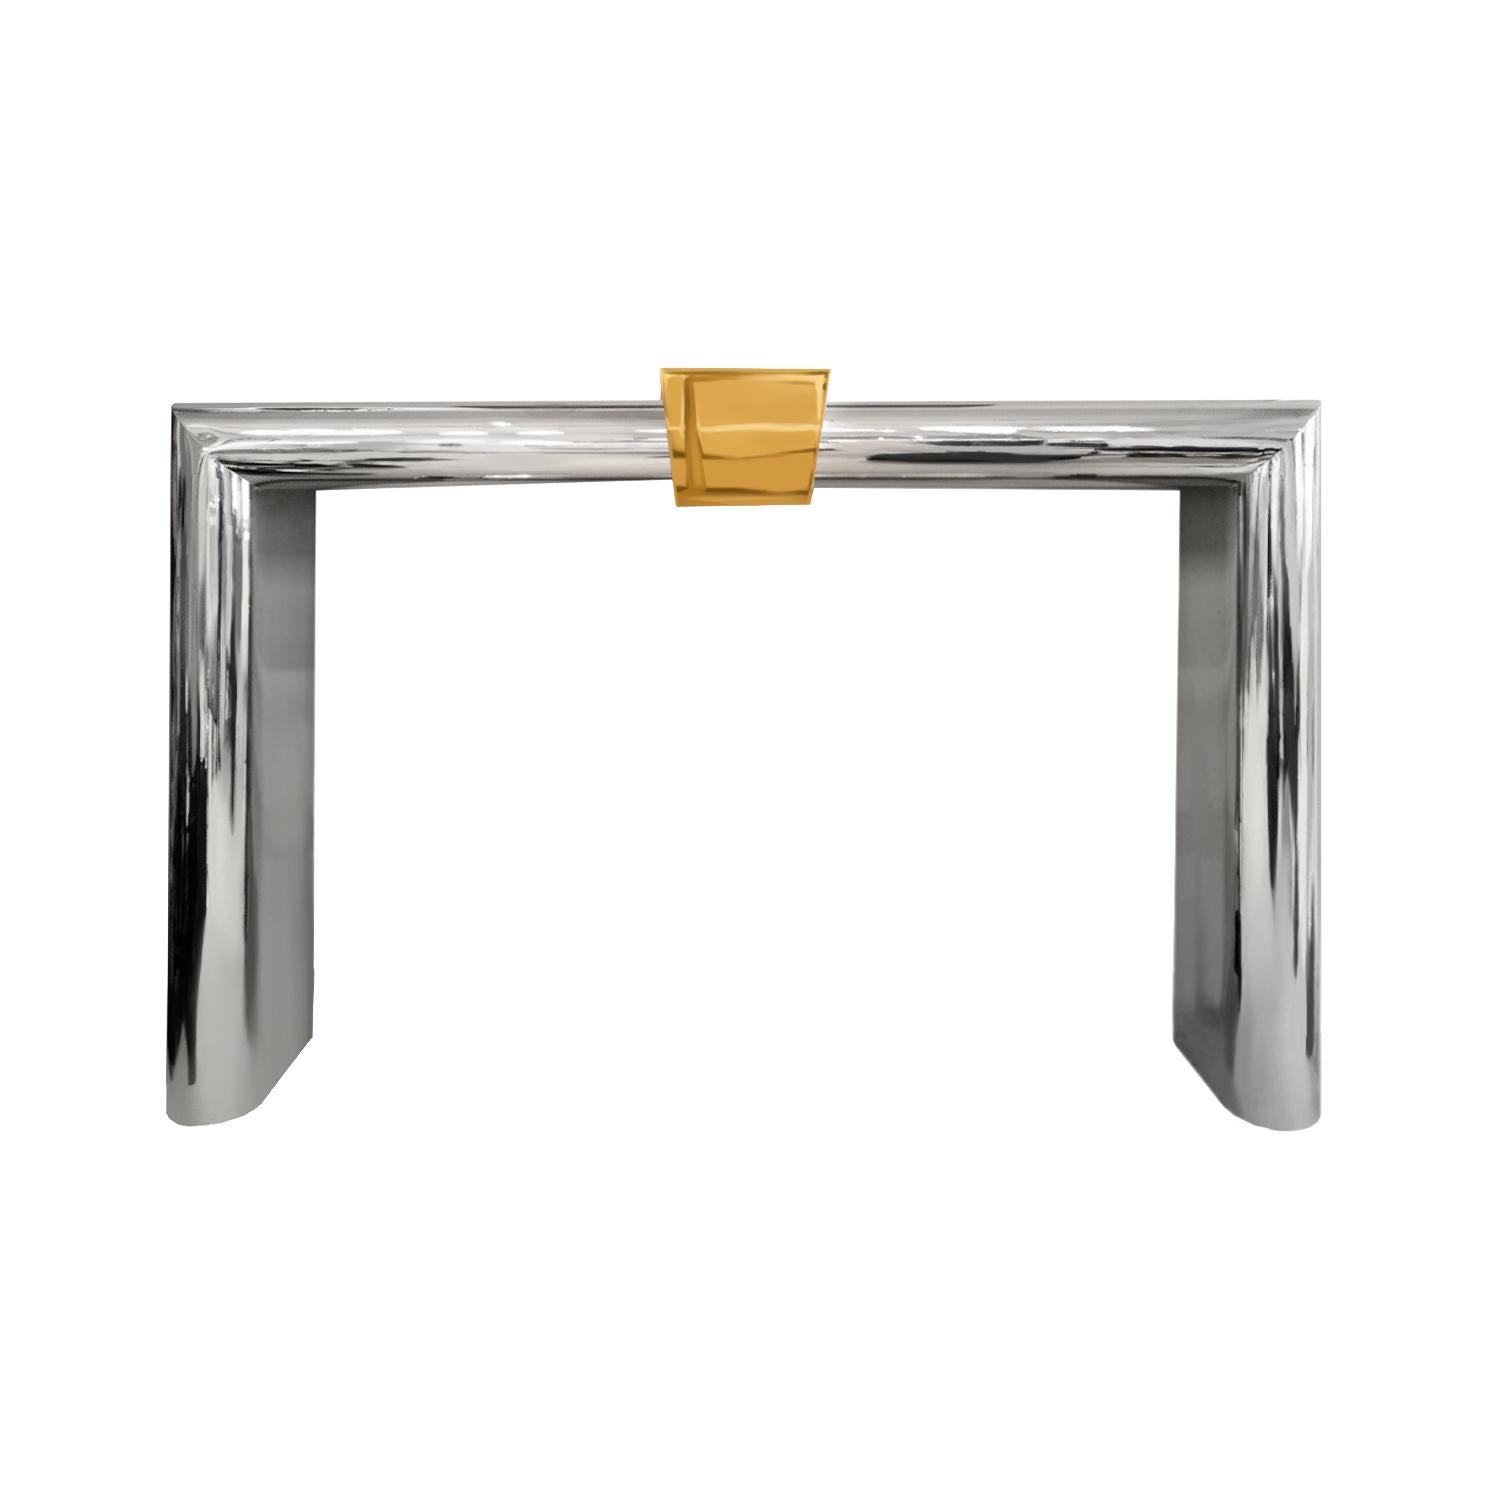 Fireplace surround in polished stainless steel with polished brass keystone by Danny Alesandro Ltd, American 1980's.  This artisan fireplace surround is beautifully made and in the style of Karl Springer.  Danny Alesandro, Ltd. was sold through